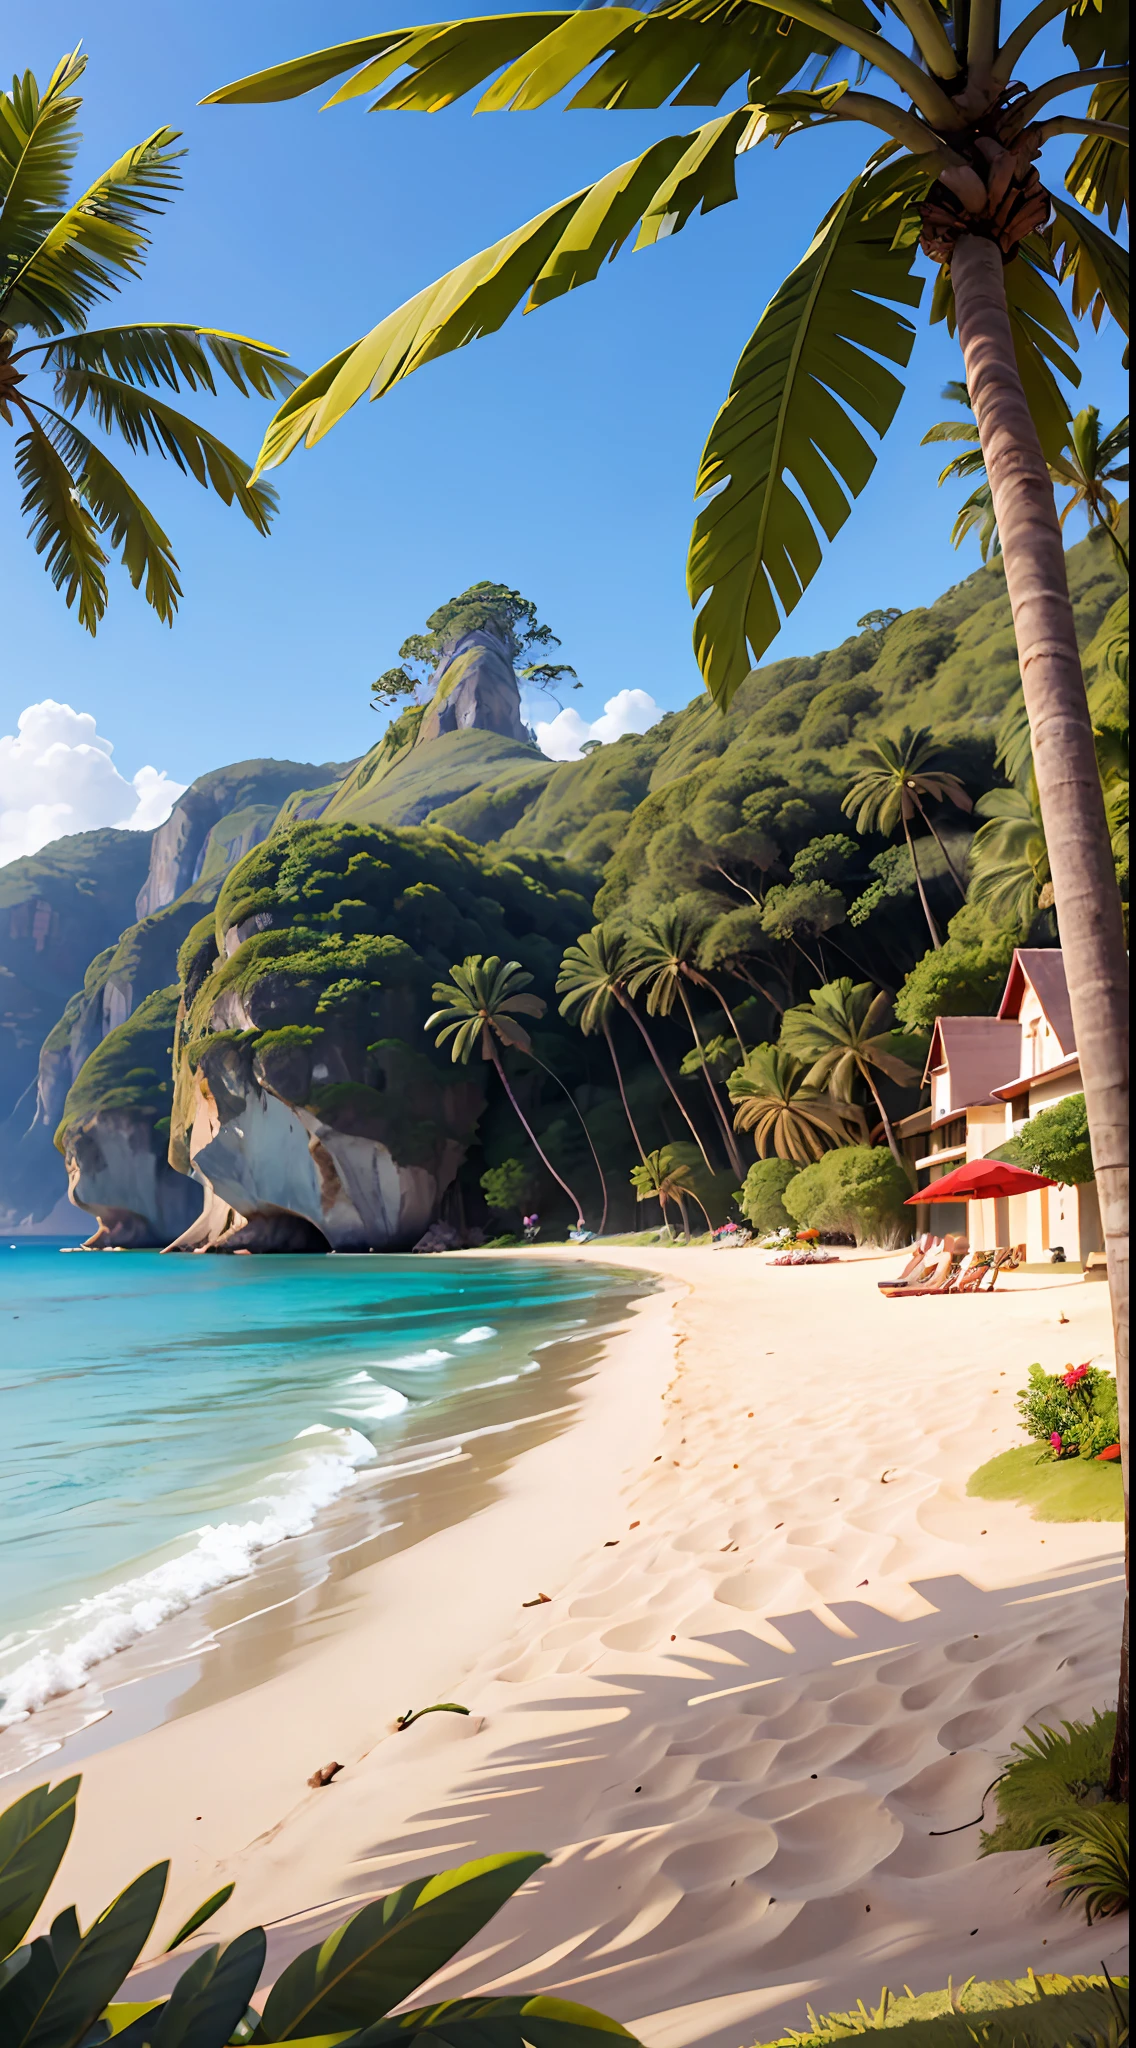 "Sandy beach with crystal-clear turquoise water, gentle waves lapping against the shore, golden sunlight casting a warm glow, palm trees swaying in a gentle breeze, colorful beach umbrellas providing shade. Ground level.